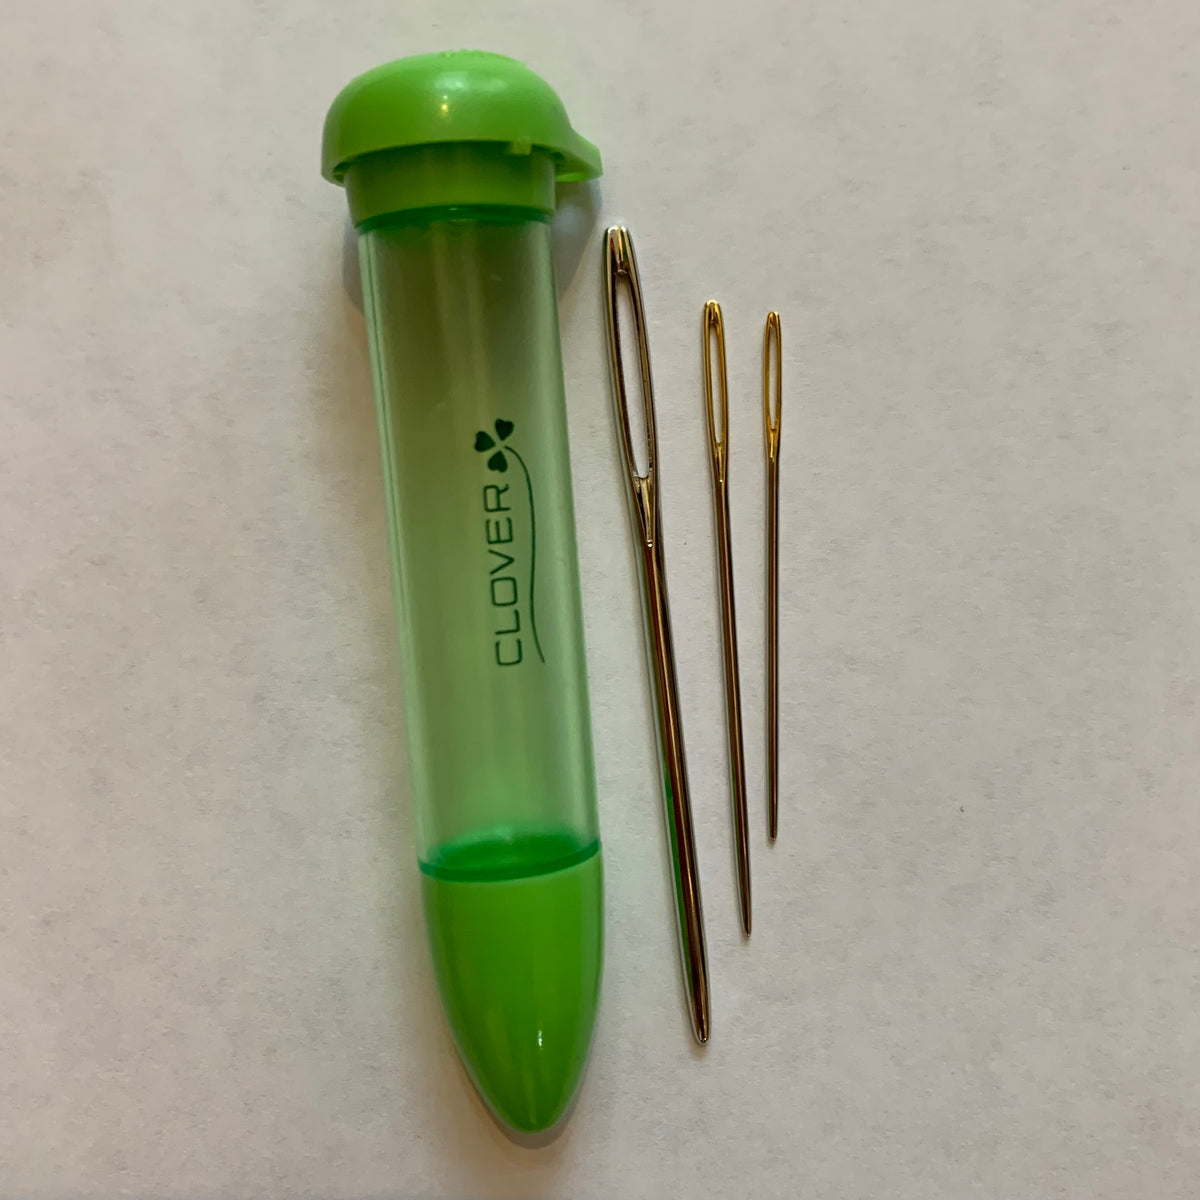 Clover Stitch Markers & Darning Needle Sets